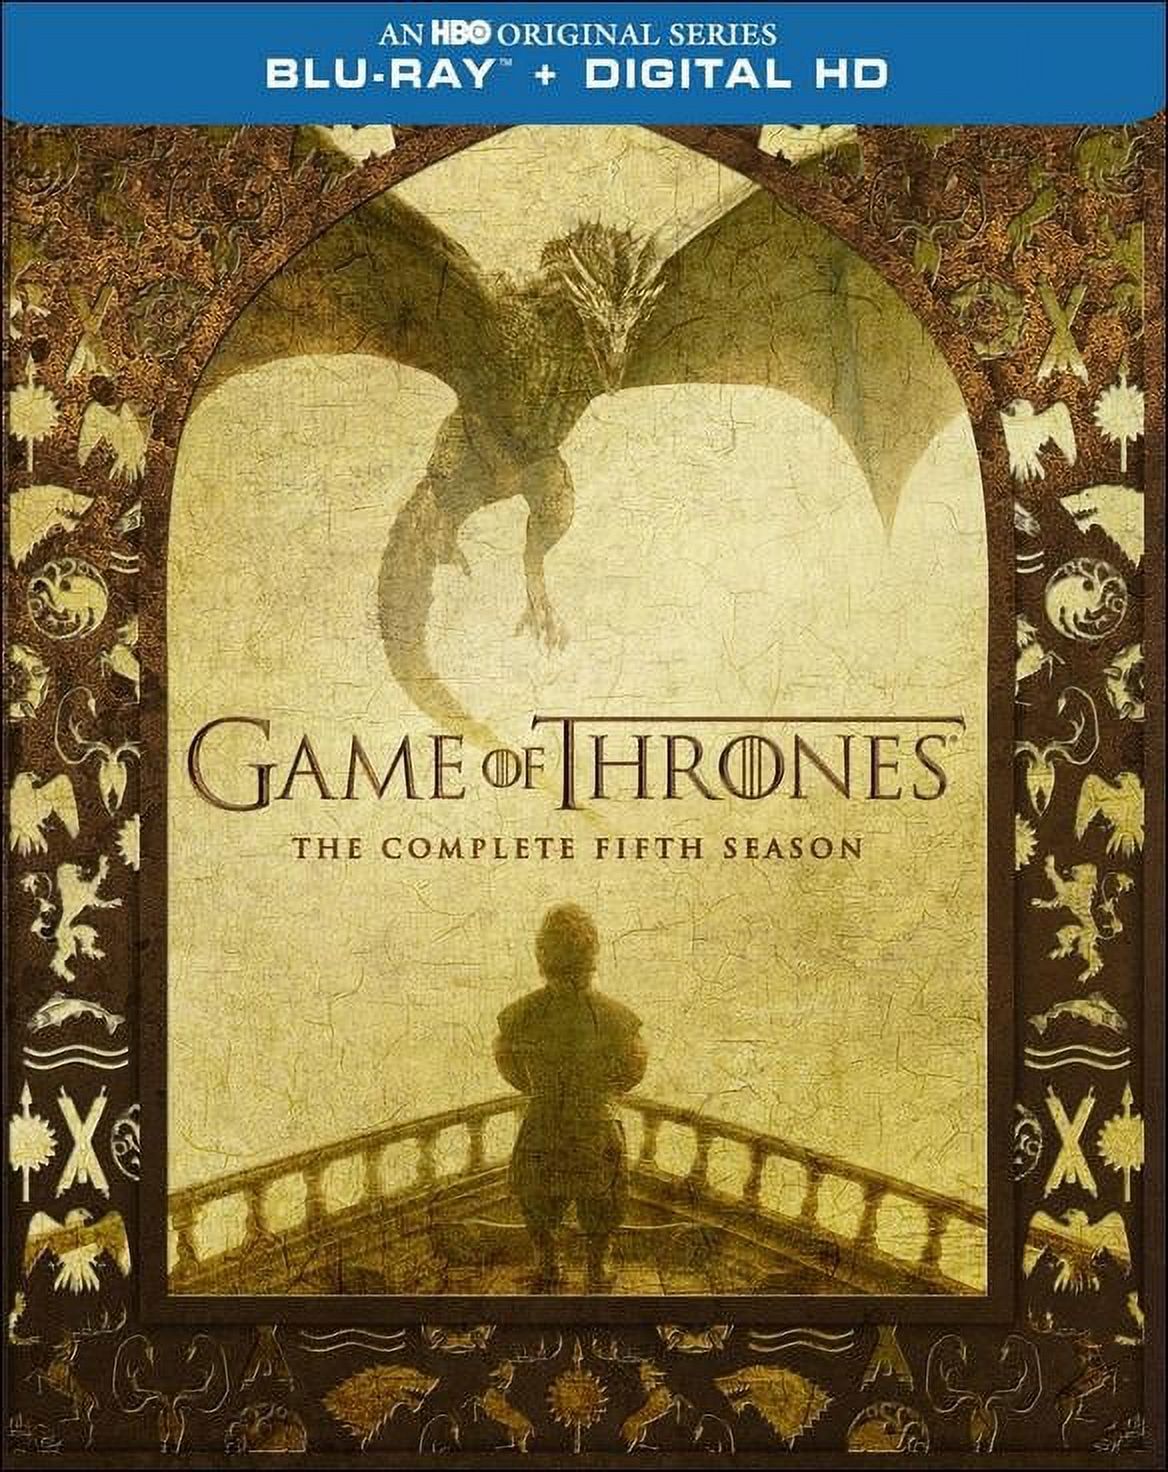 Game of Thrones: The Complete Fifth Season (Blu-ray) - image 5 of 5